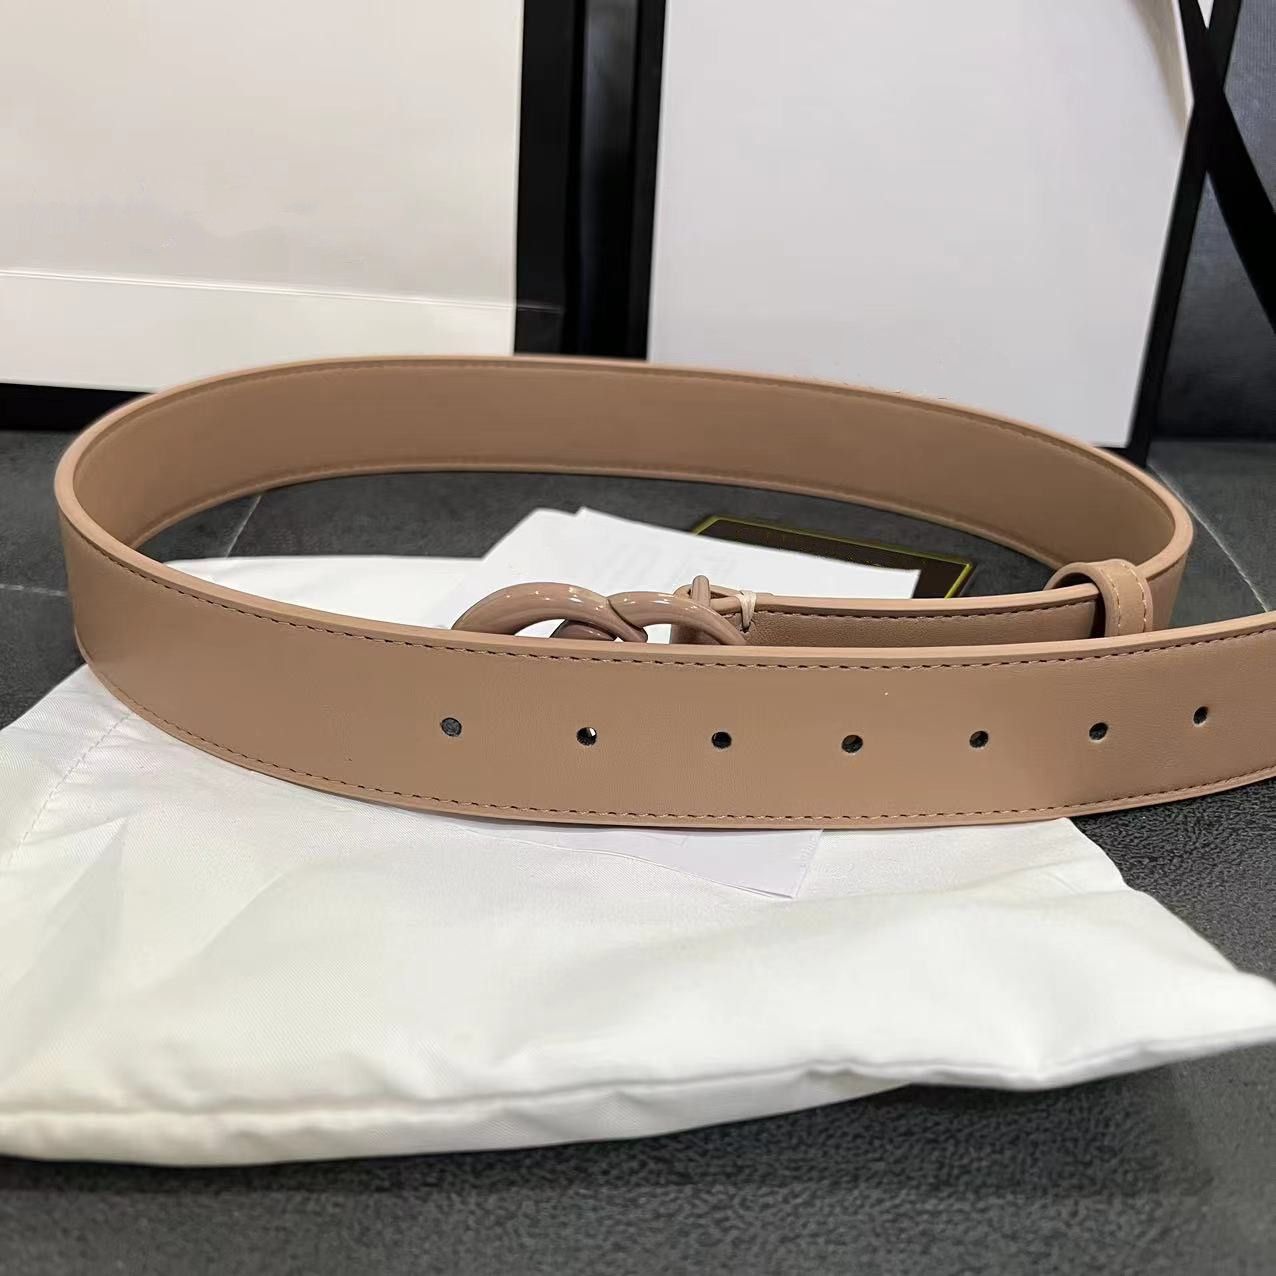 Classic Unisex Designer Belts With Smooth Buckle Width Options Of 2.0cm To  3.8cm Comes With Box From Fashionbelt88, $6.76